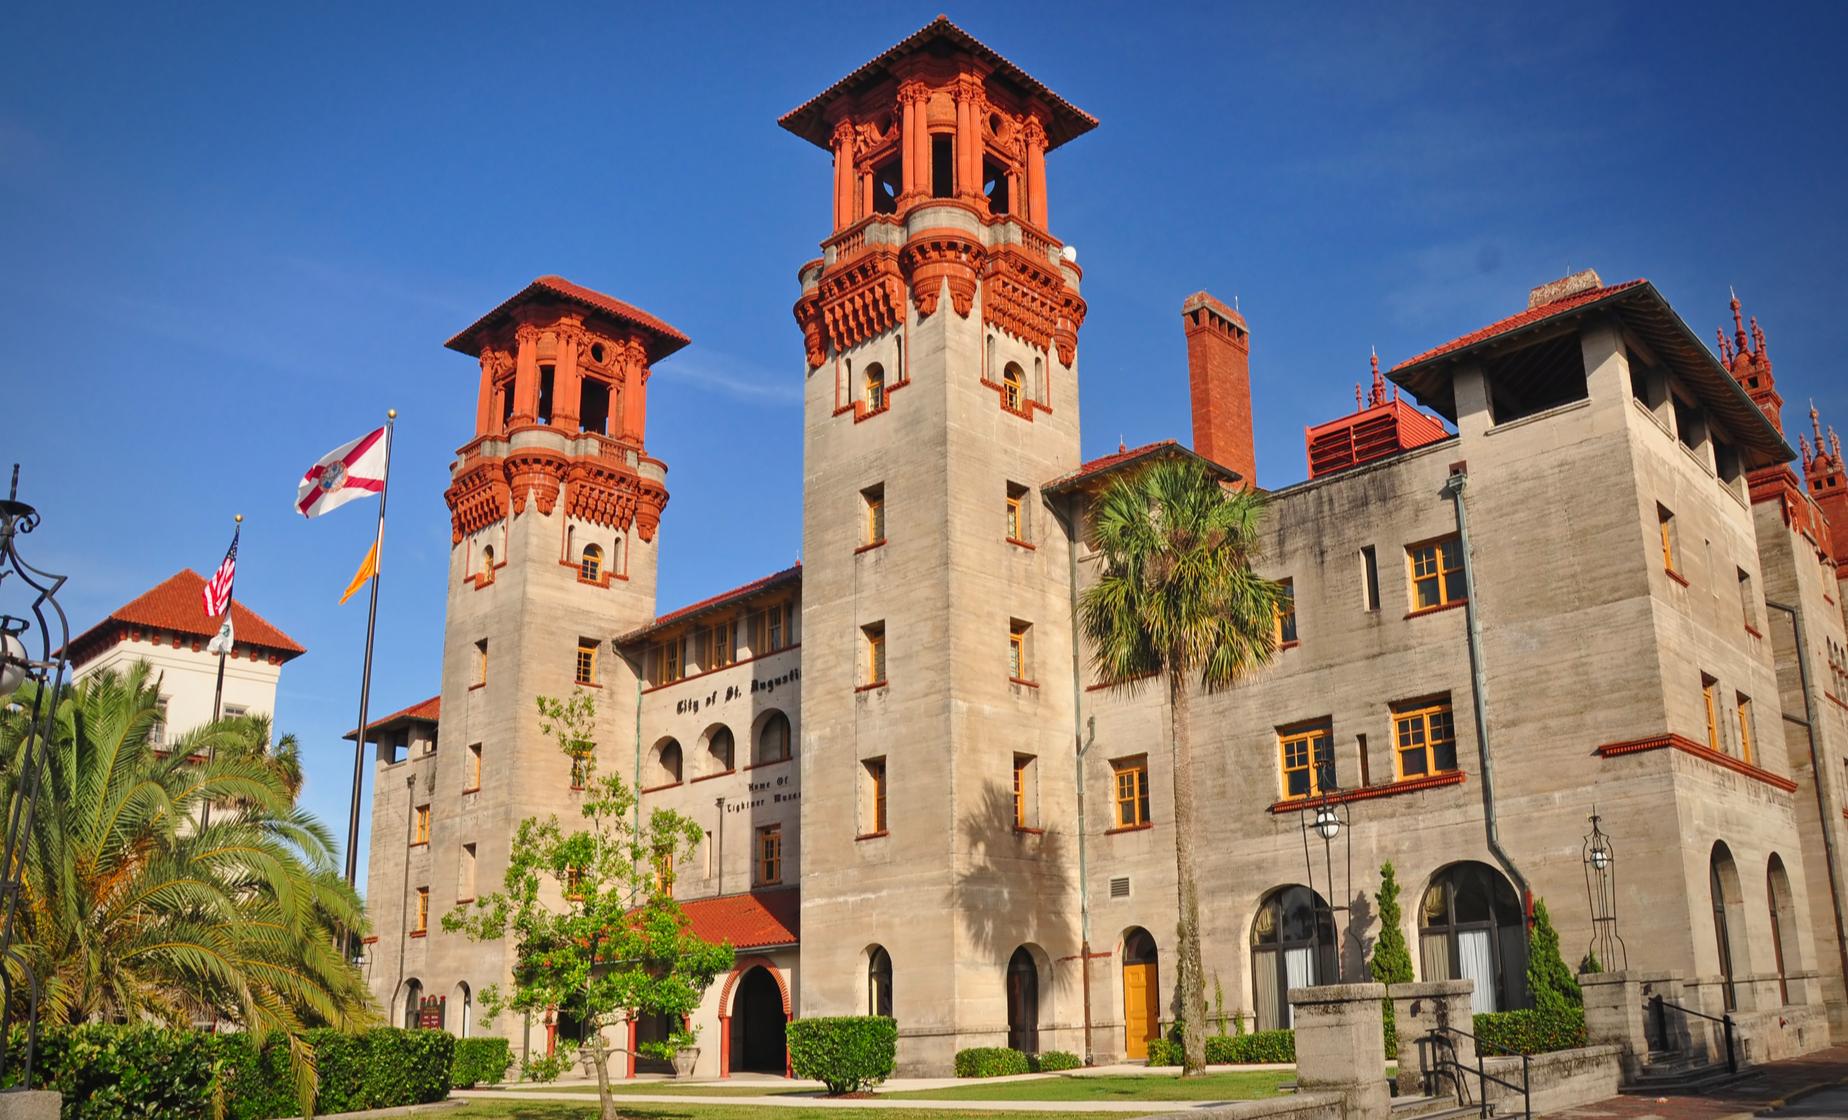 Scenic Cruise and Day Trip to St. Augustine from Orlando (Lightner Museum, Flagler College)